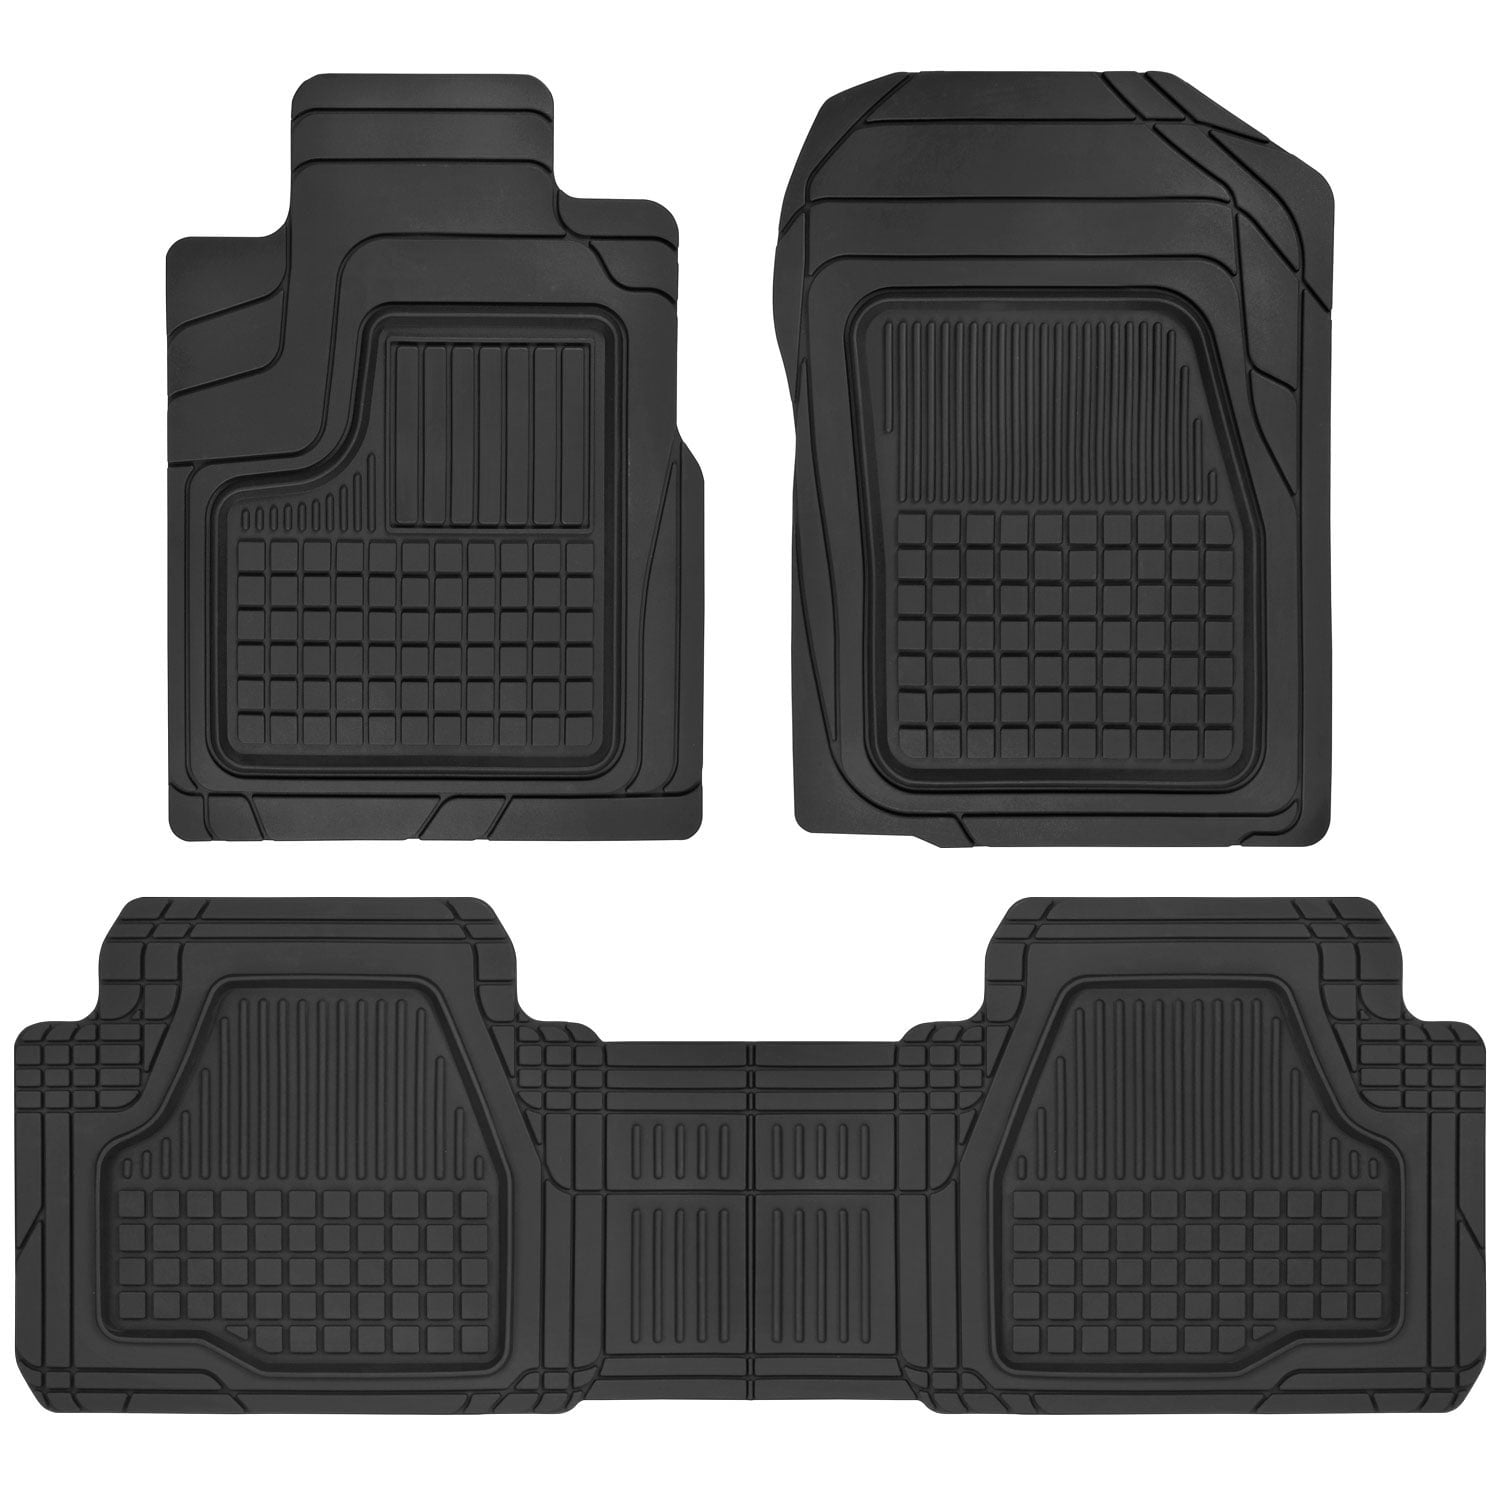 Black Caterpillar Deep Dish Rubber Floor Mats All Weather for Car Truck SUV & Van Total Protection Durable Trim to Fit Liners Heavy Duty Odorless Model Number CAMT-1004-BK